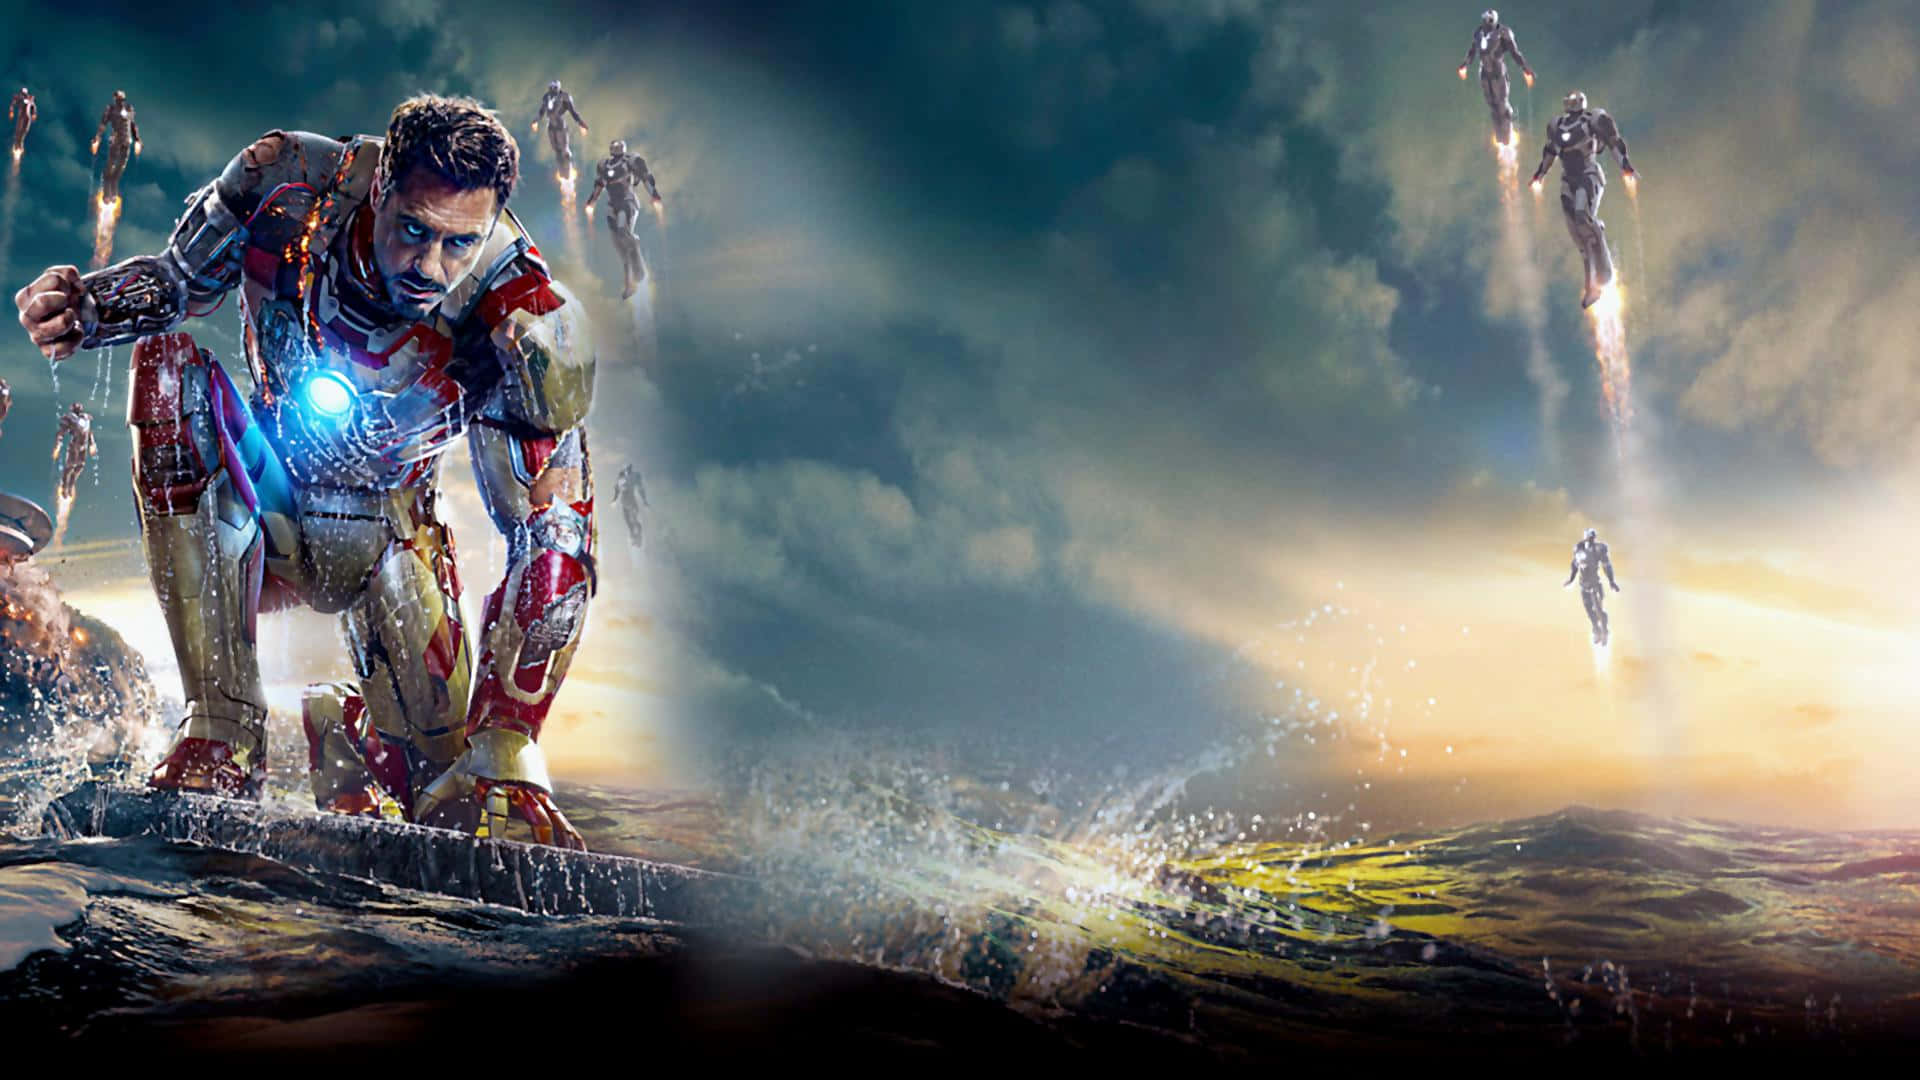 Iron Man 3 - Suit Up For A Wild Adventure Background